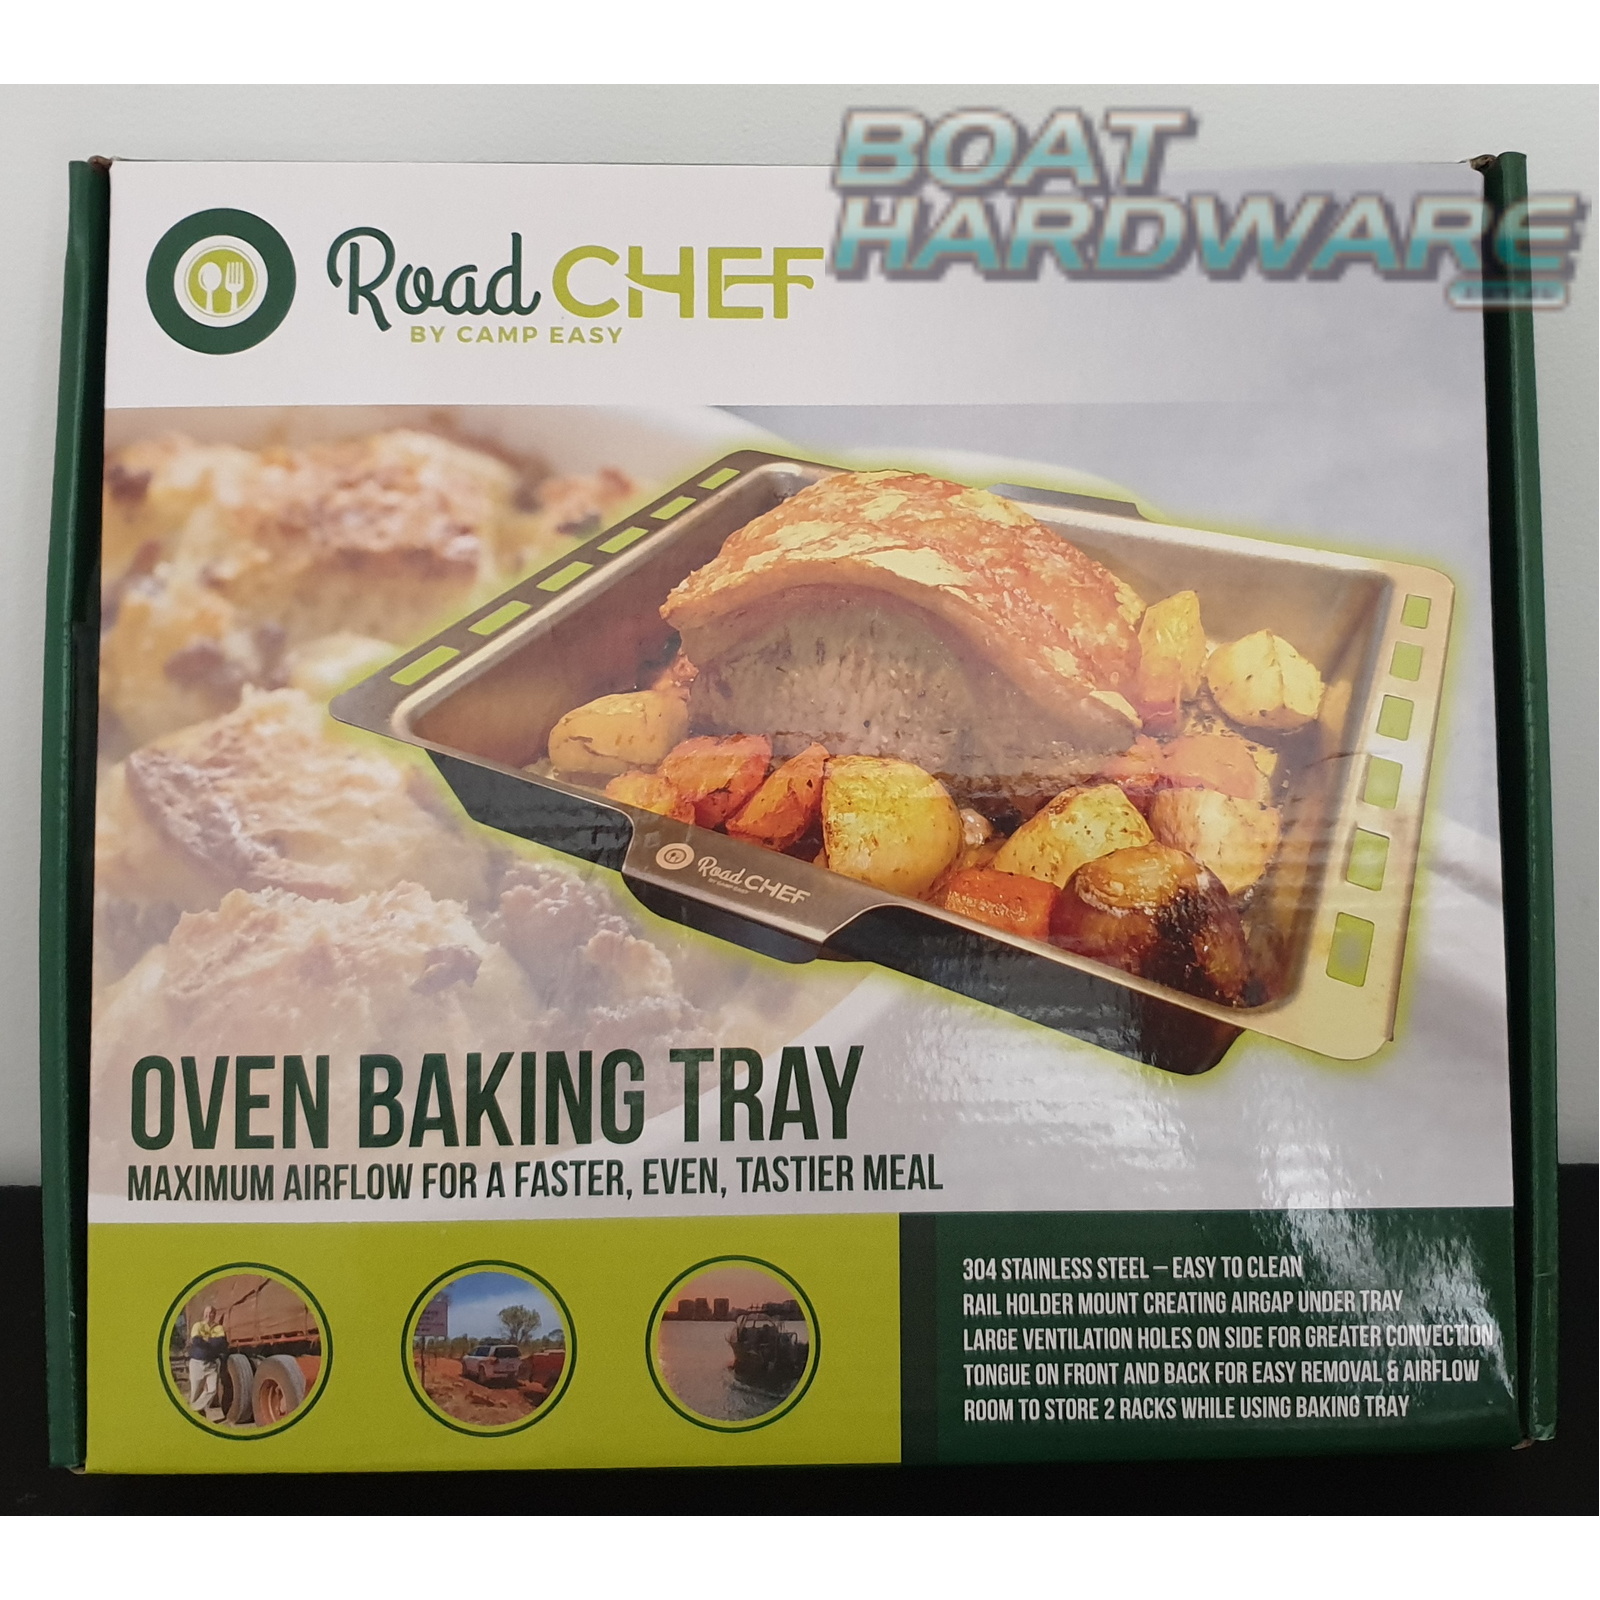 Baking Tray for Road Chef Travel Oven